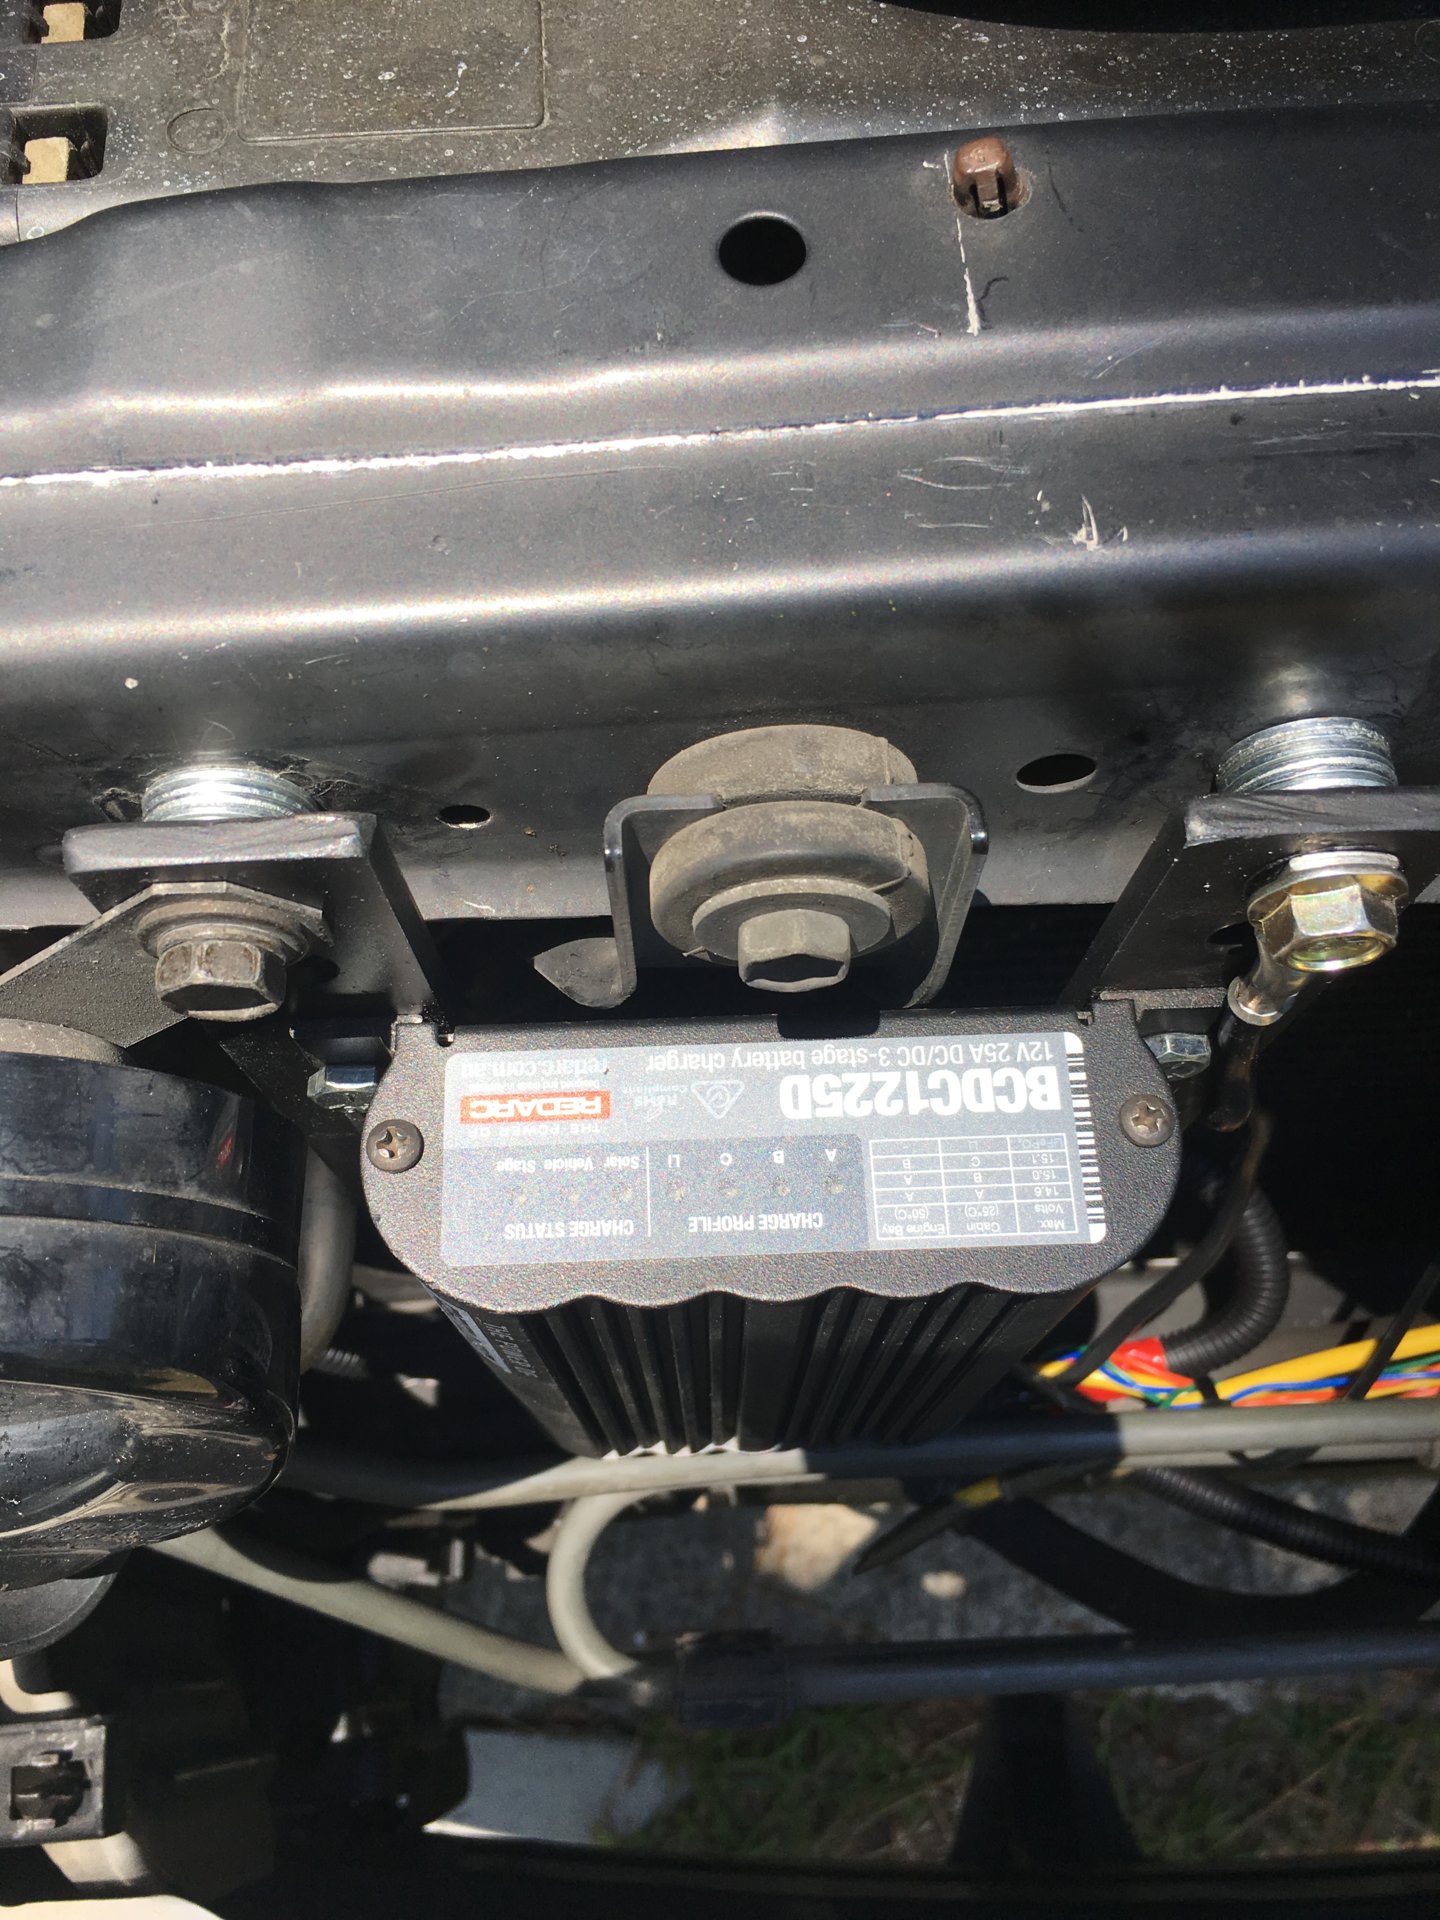 Dual Battery, Redarc charger, and Aux Fuse Panel Install | IH8MUD 